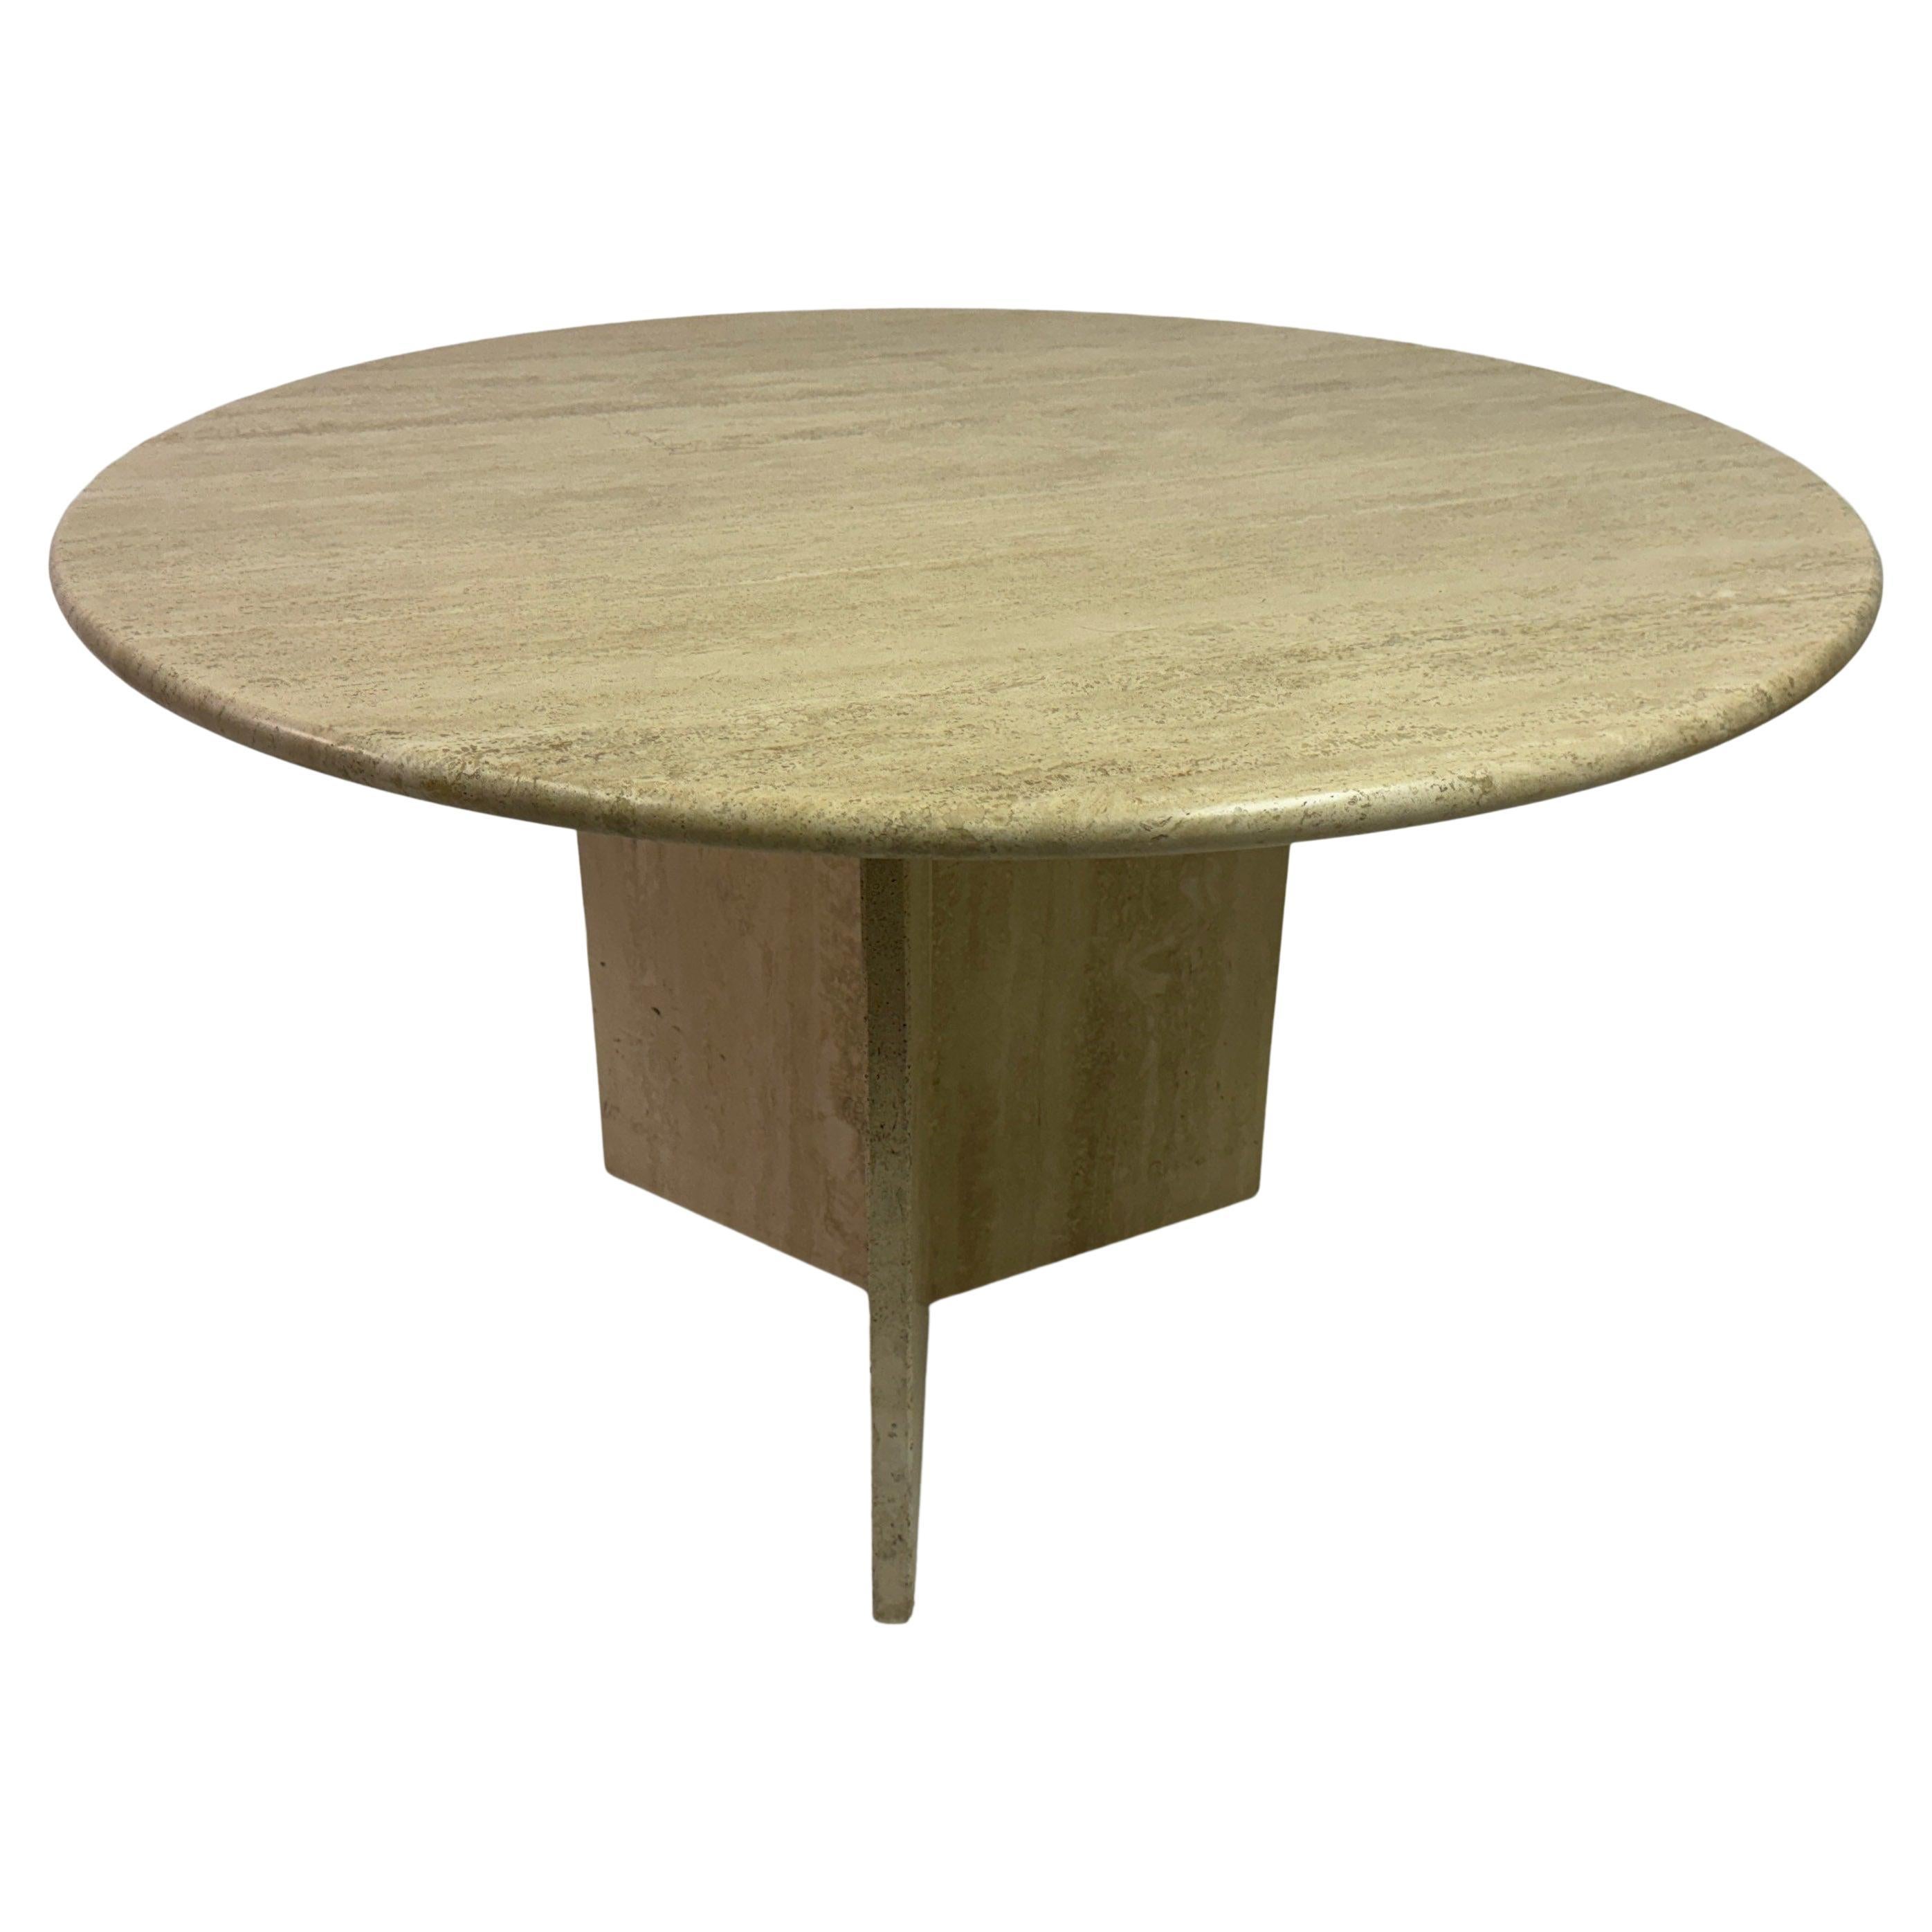 Vintage Round Travertine Dining Table For Sale